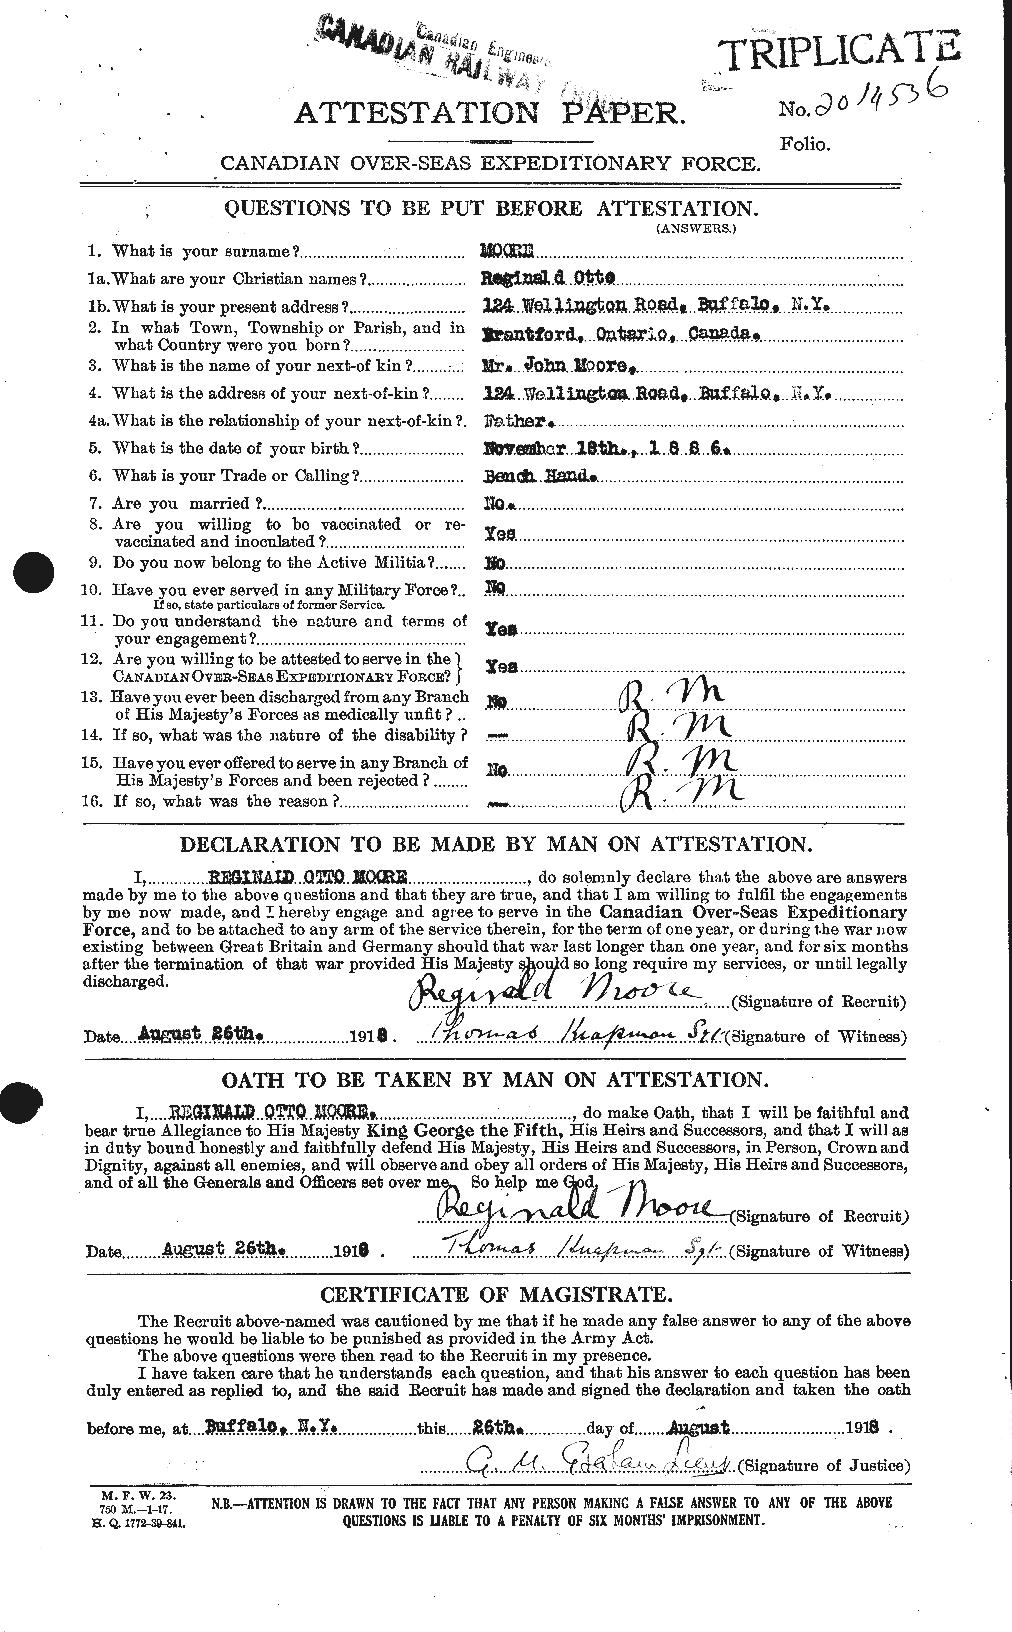 Personnel Records of the First World War - CEF 503526a